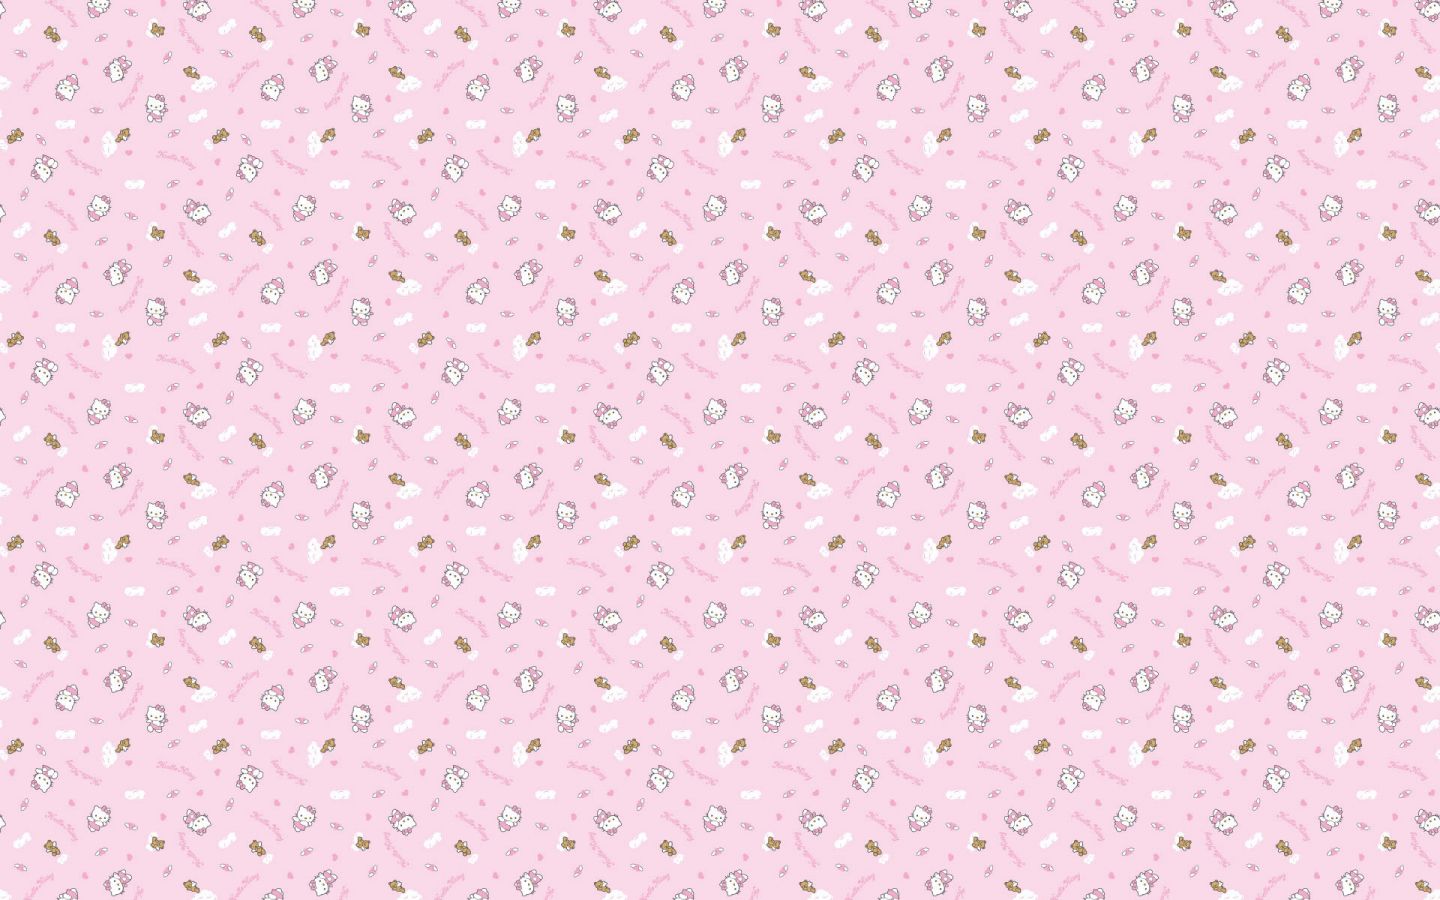 Pink and white polka dot pattern on a light background - Hello Kitty